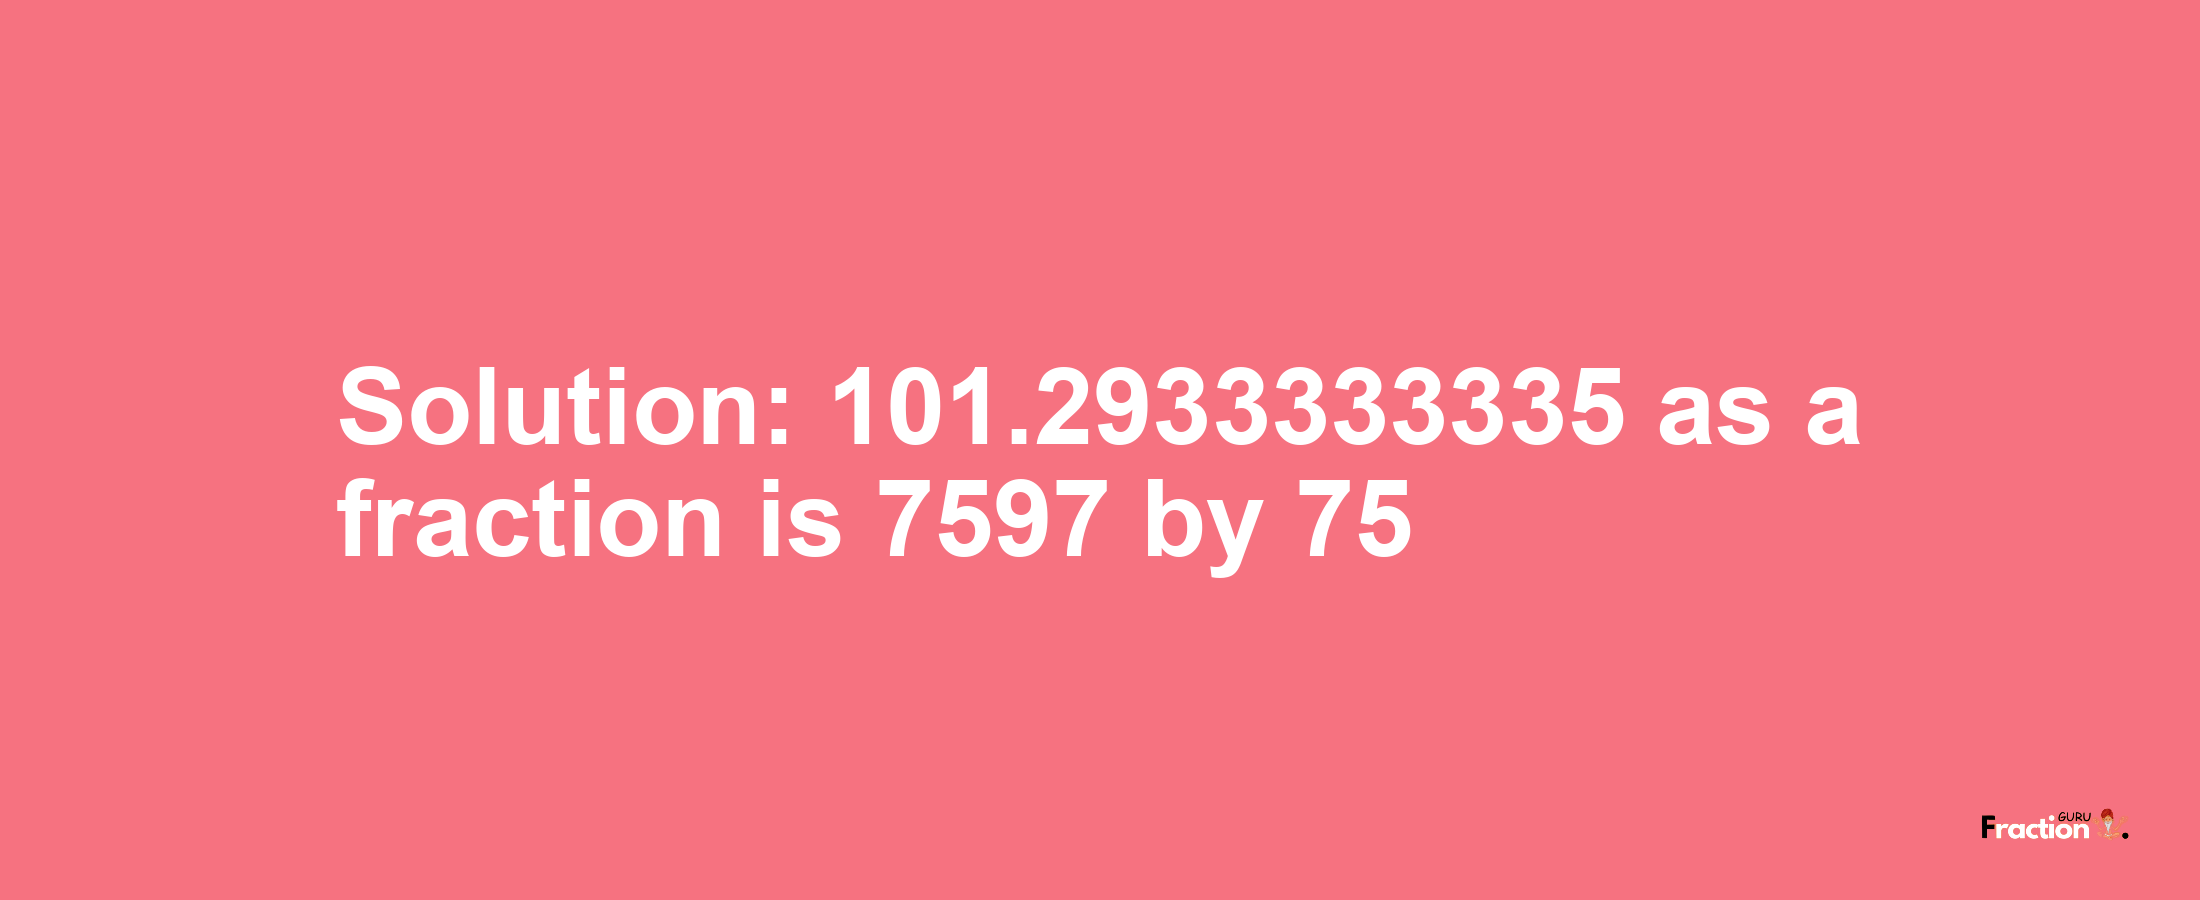 Solution:101.2933333335 as a fraction is 7597/75